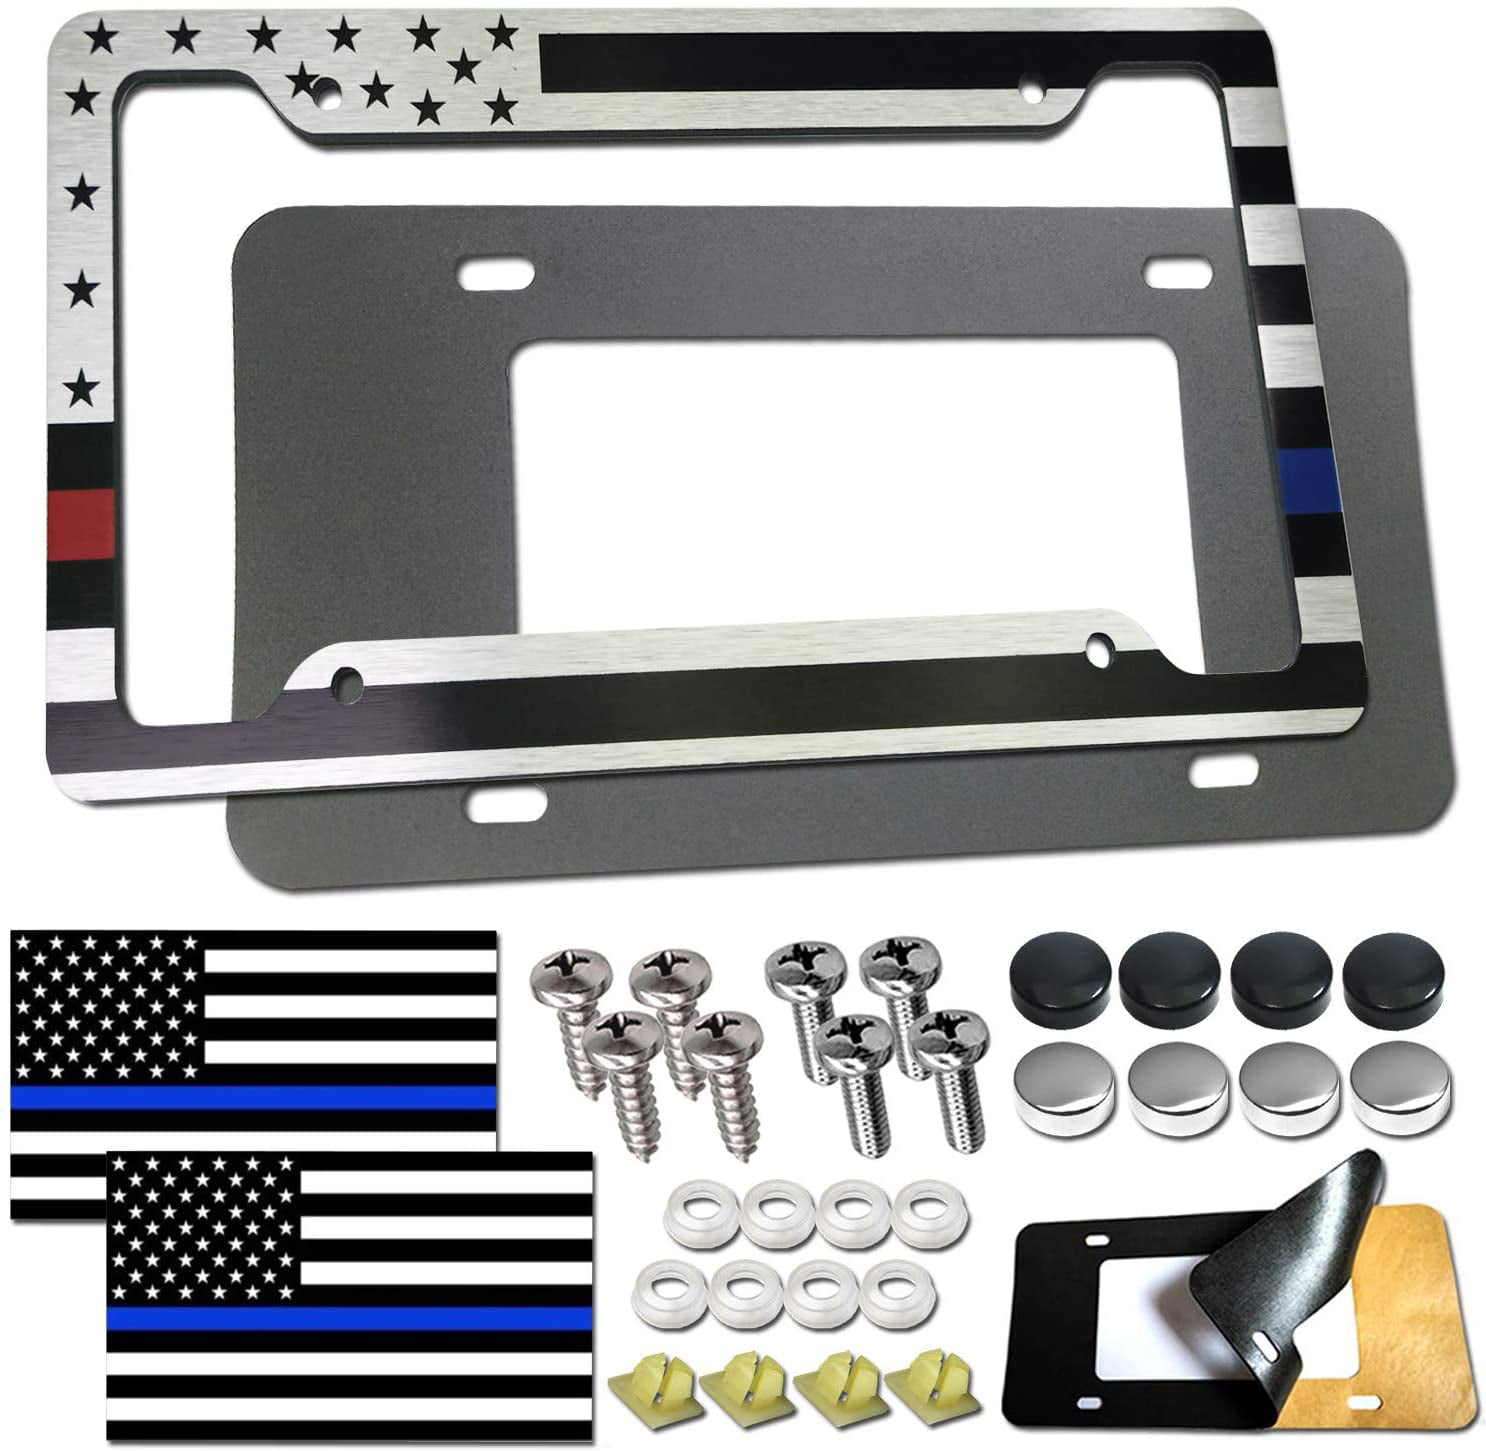 Truck or SUV 4 Hole Black Heavy-Duty Aluminum Bracket Flag Decal Screws Caps Novelty Thin Cover for Front Bumper American Flag License Plate Frame- USA Patriotic Personalized Car Tag Holder 